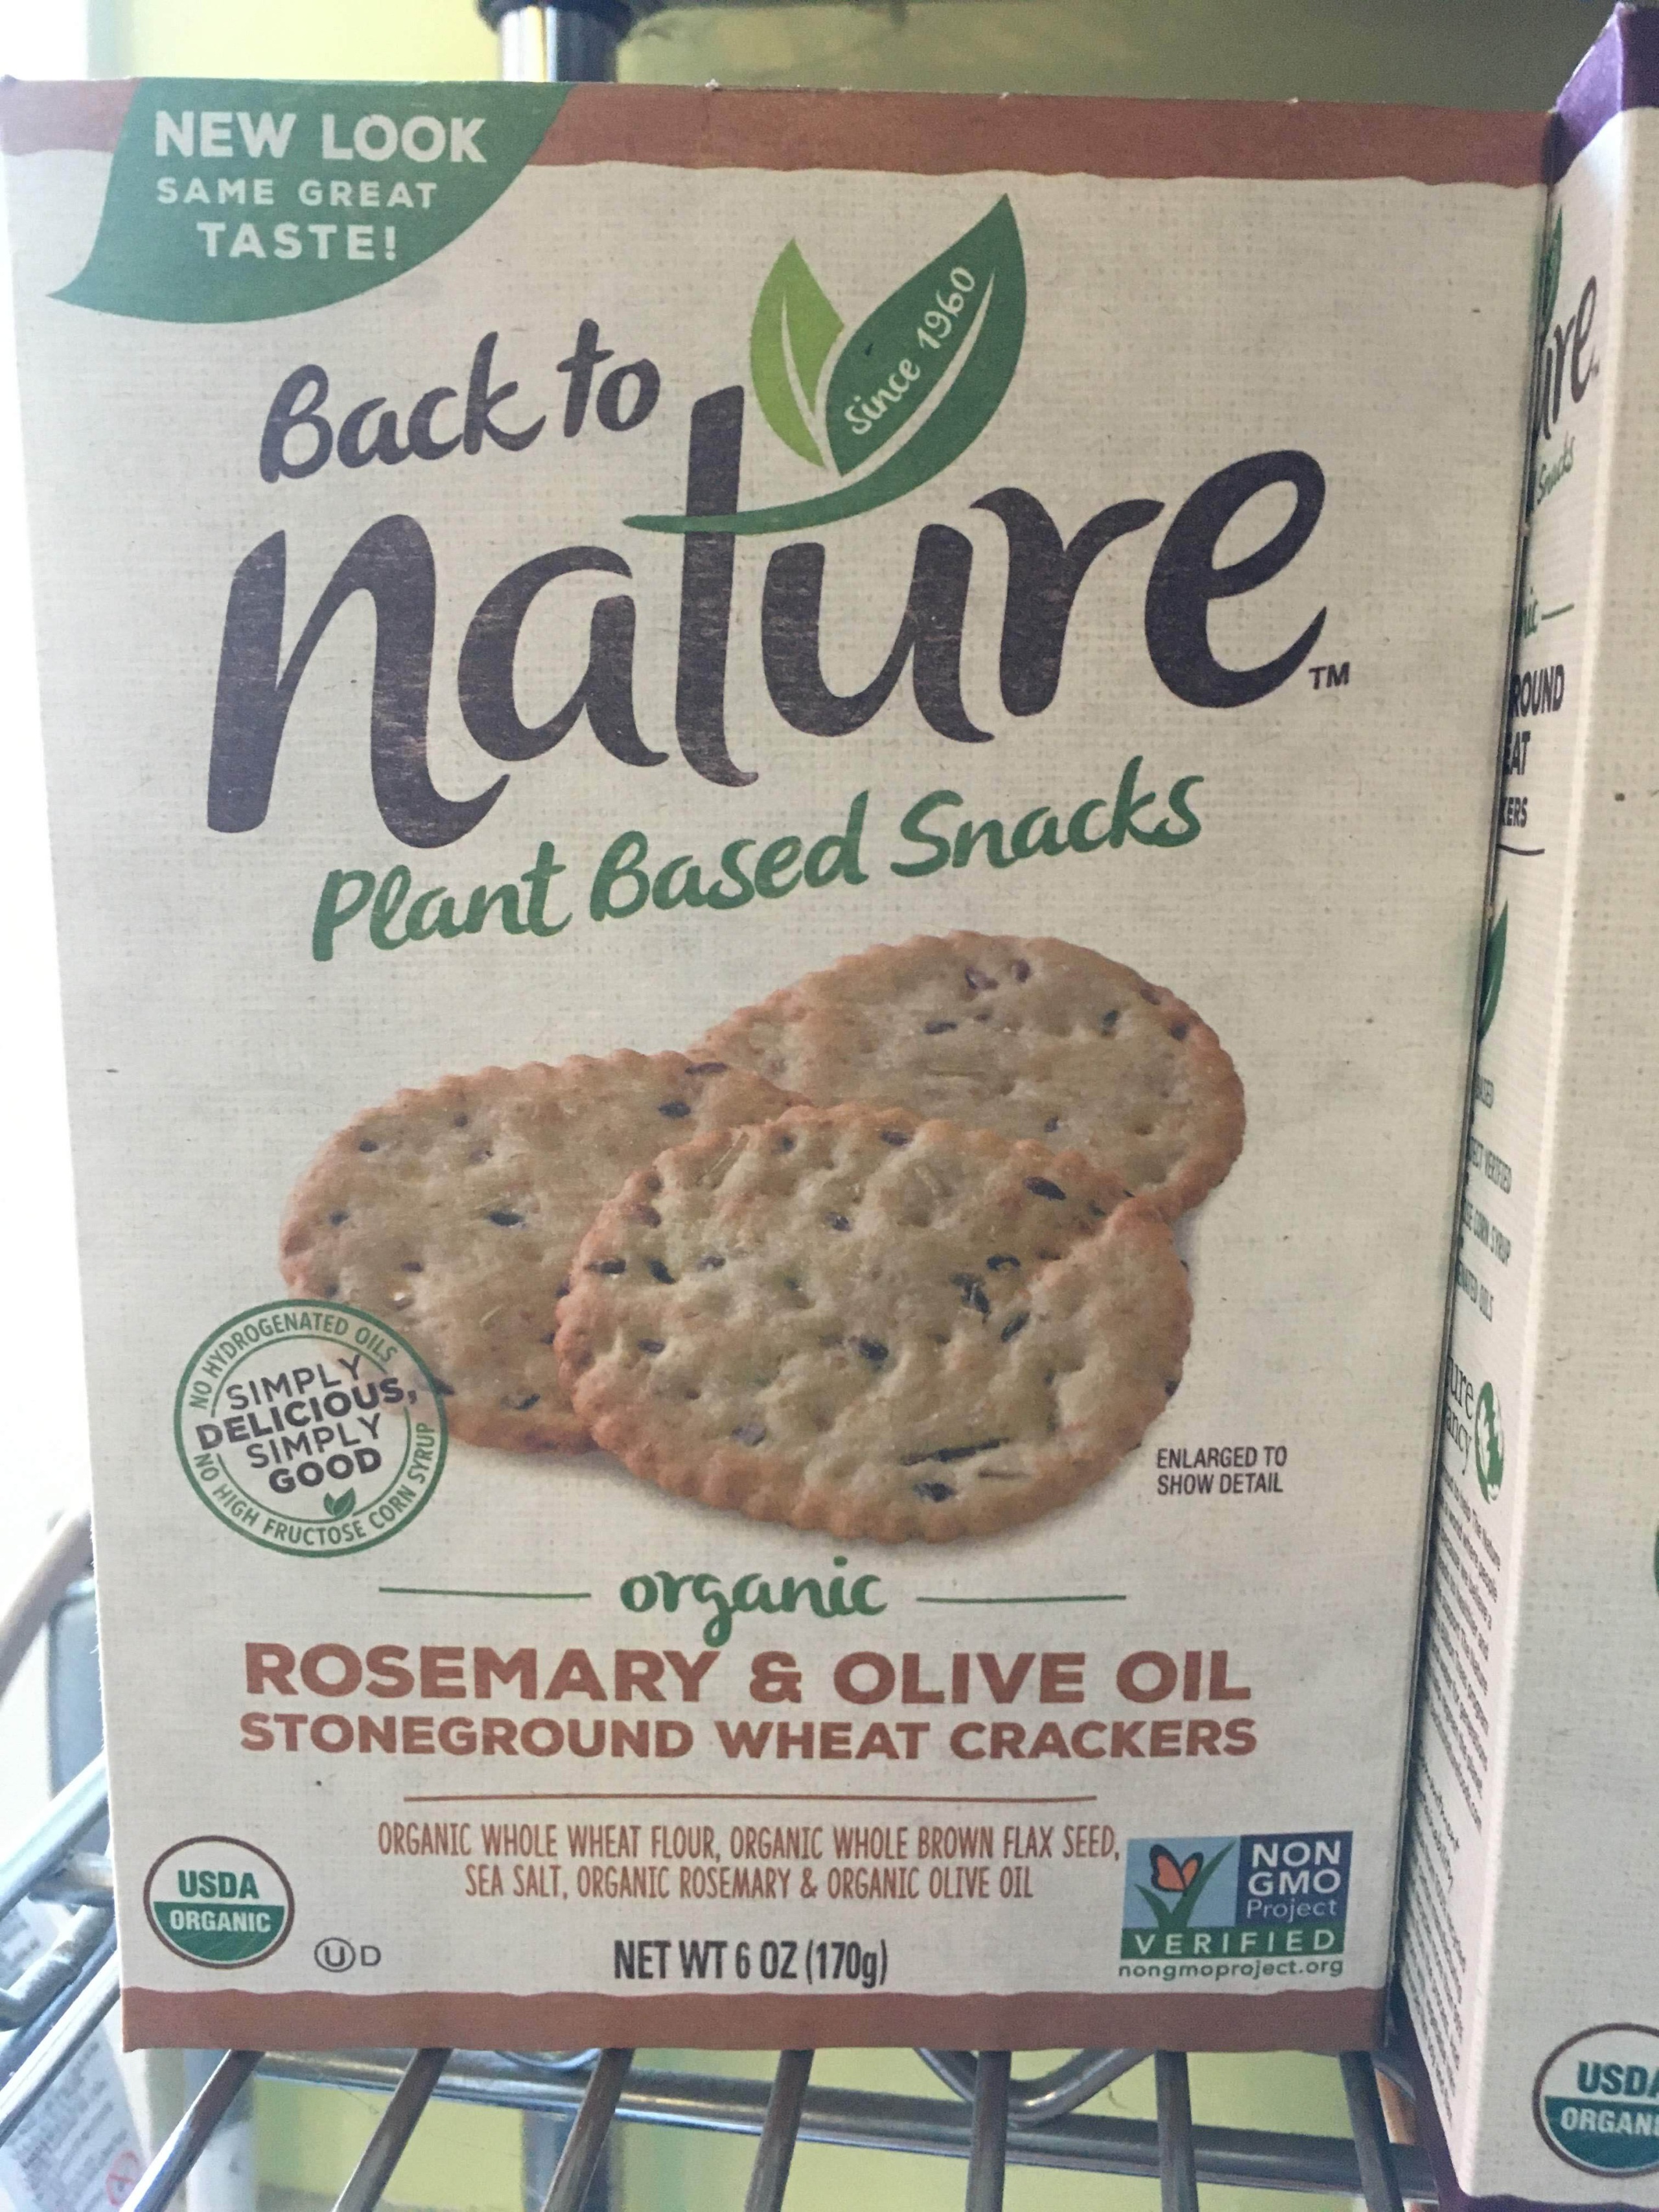 Crackers And Flatbread Back To Nature Dogwood Bread Company